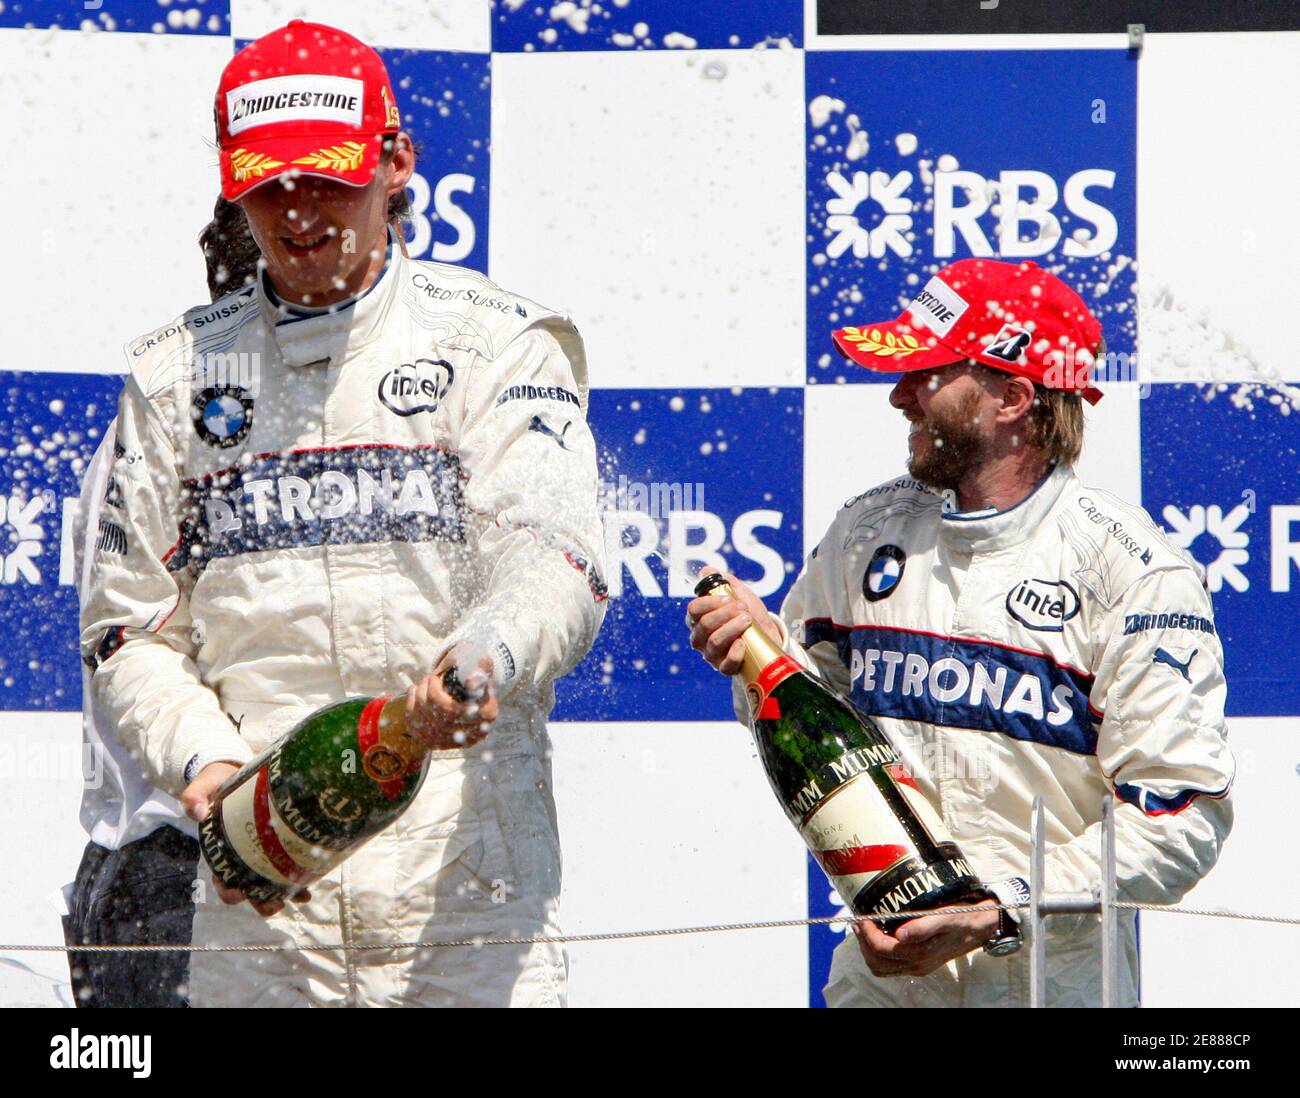 BMW Sauber Formula One driver Robert Kubica (L) of Poland celebrates his win with teammate Nick Heidfeld (R) of Germany at the Canadian F1 Grand Prix in Montreal June 8, 2008. Heidfeld finished second.     REUTERS/Chris Wattie (CANADA) Stock Photo